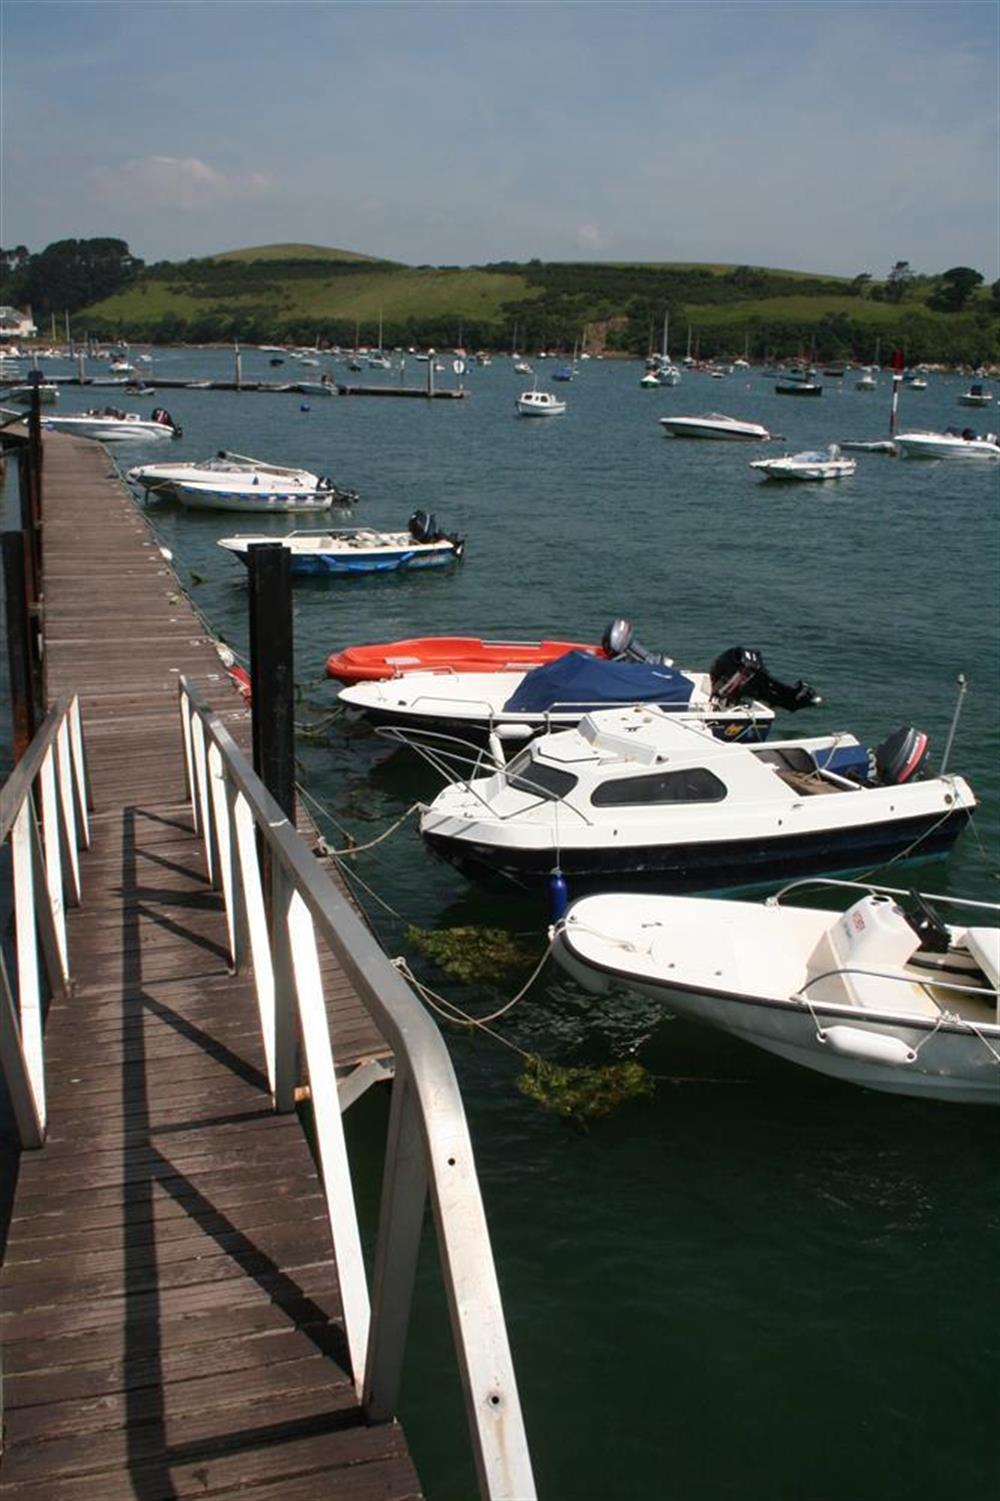 The Mooring pontoon at The Salcombe at Flat 32 The Salcombe in Fore Street, Salcombe